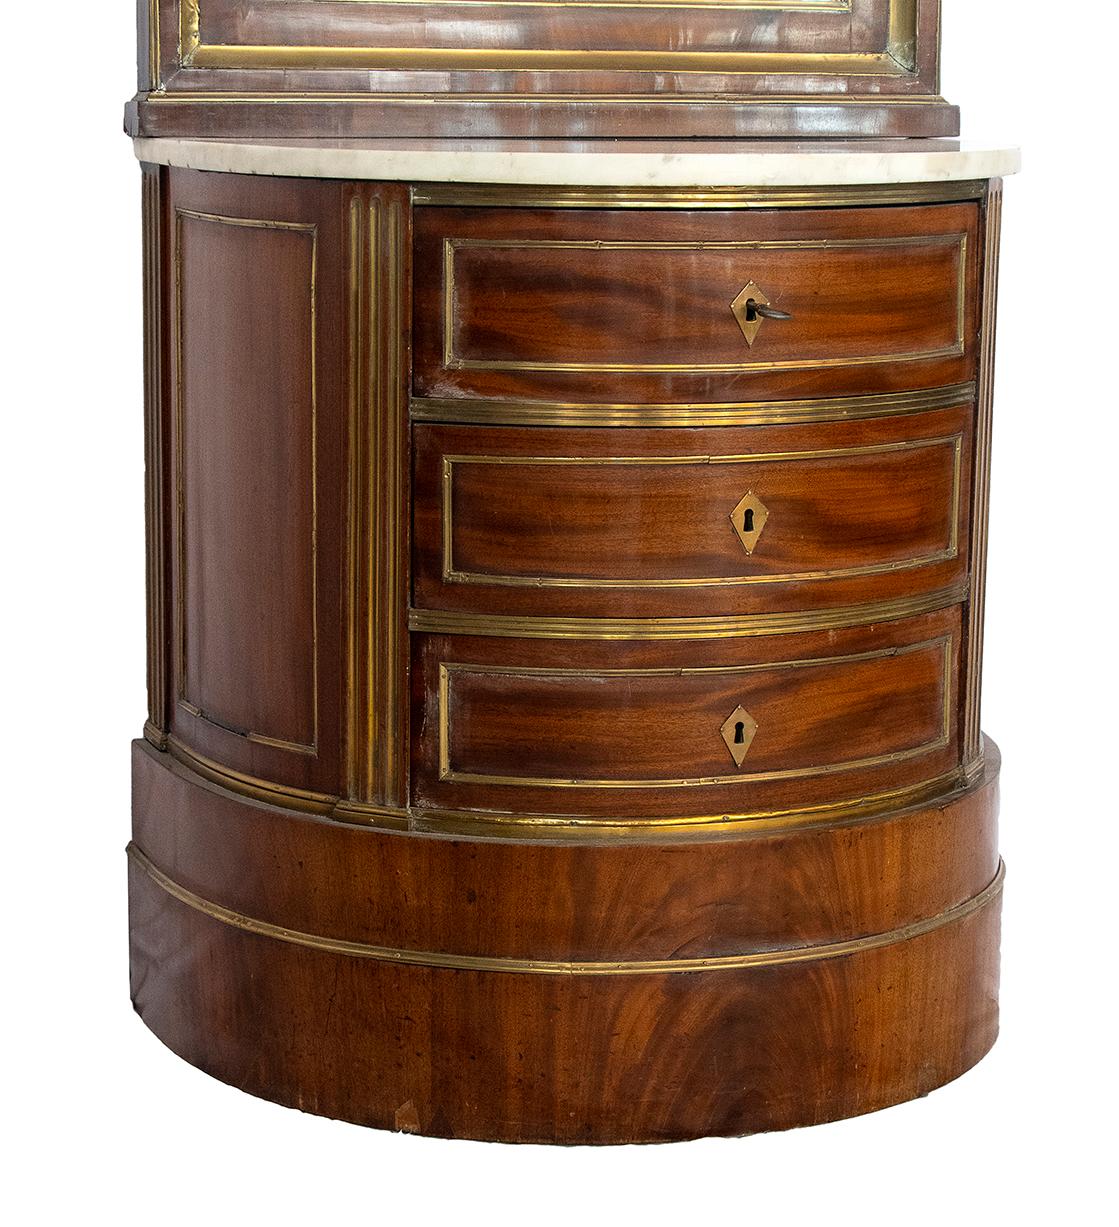 Hand-Painted 19th Century Russian Biedermeier Mahogany Commode Chest of Drawers Mirror For Sale